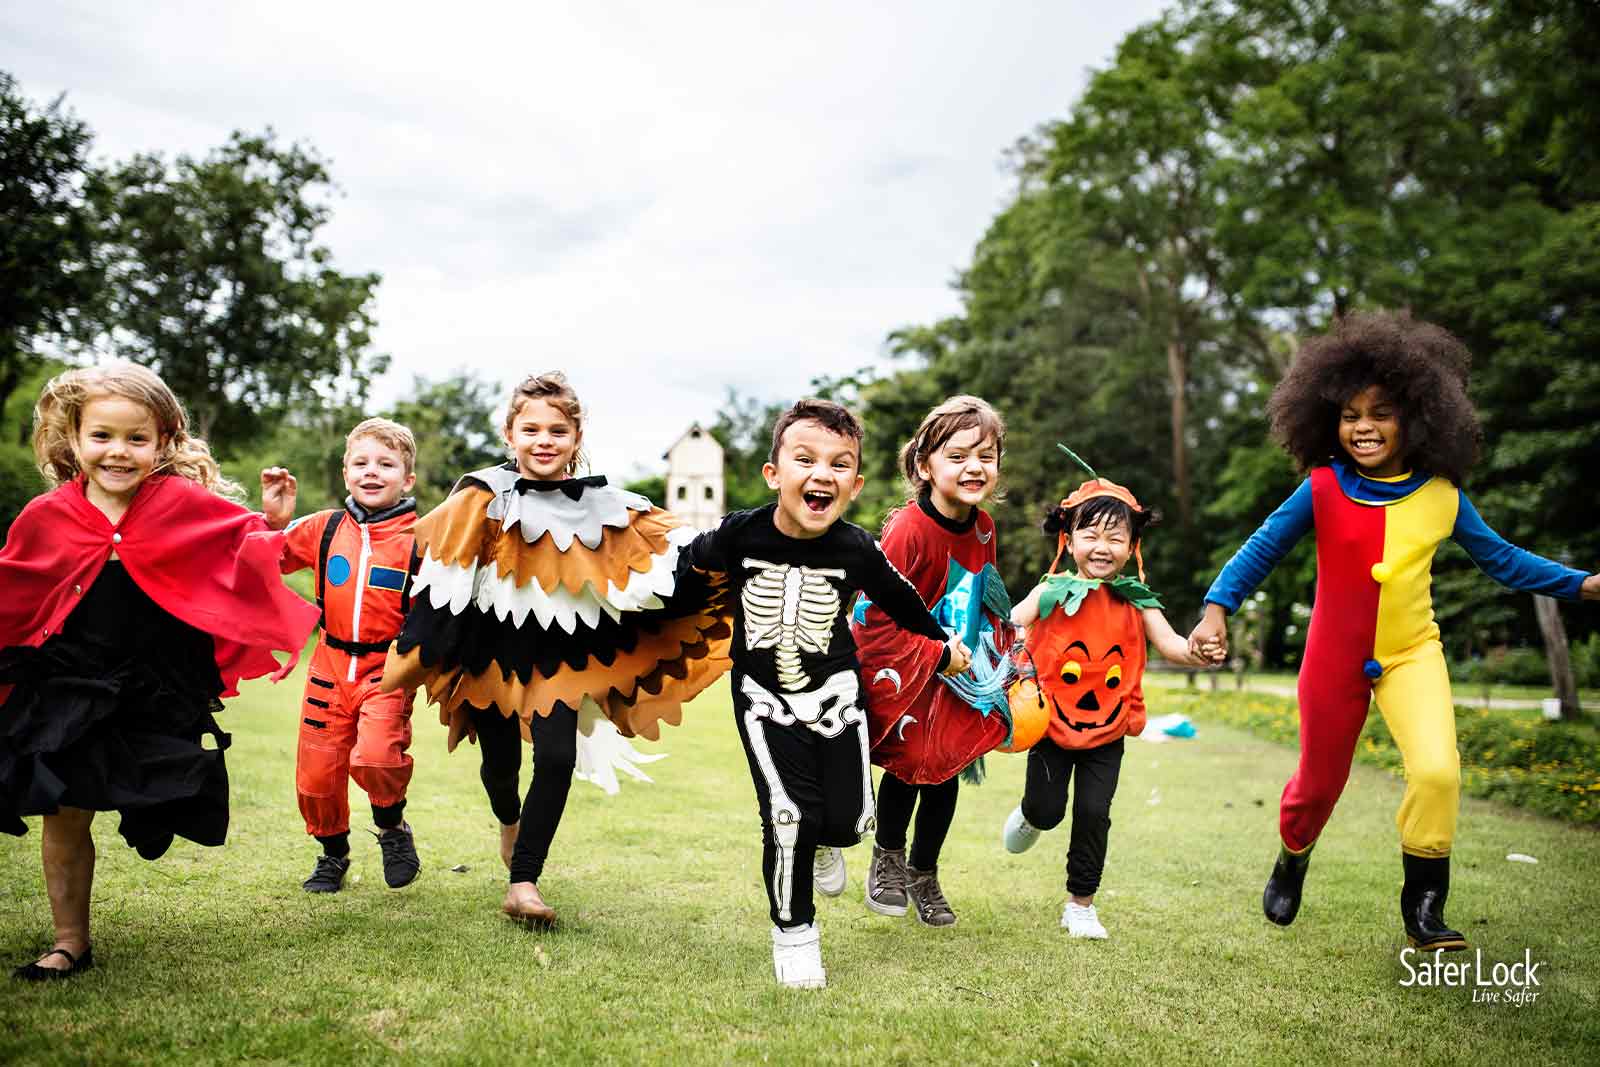 Don’t let a preventable injury ruin the holiday. Get Halloween safety tips to keep your kids safe this holiday season.